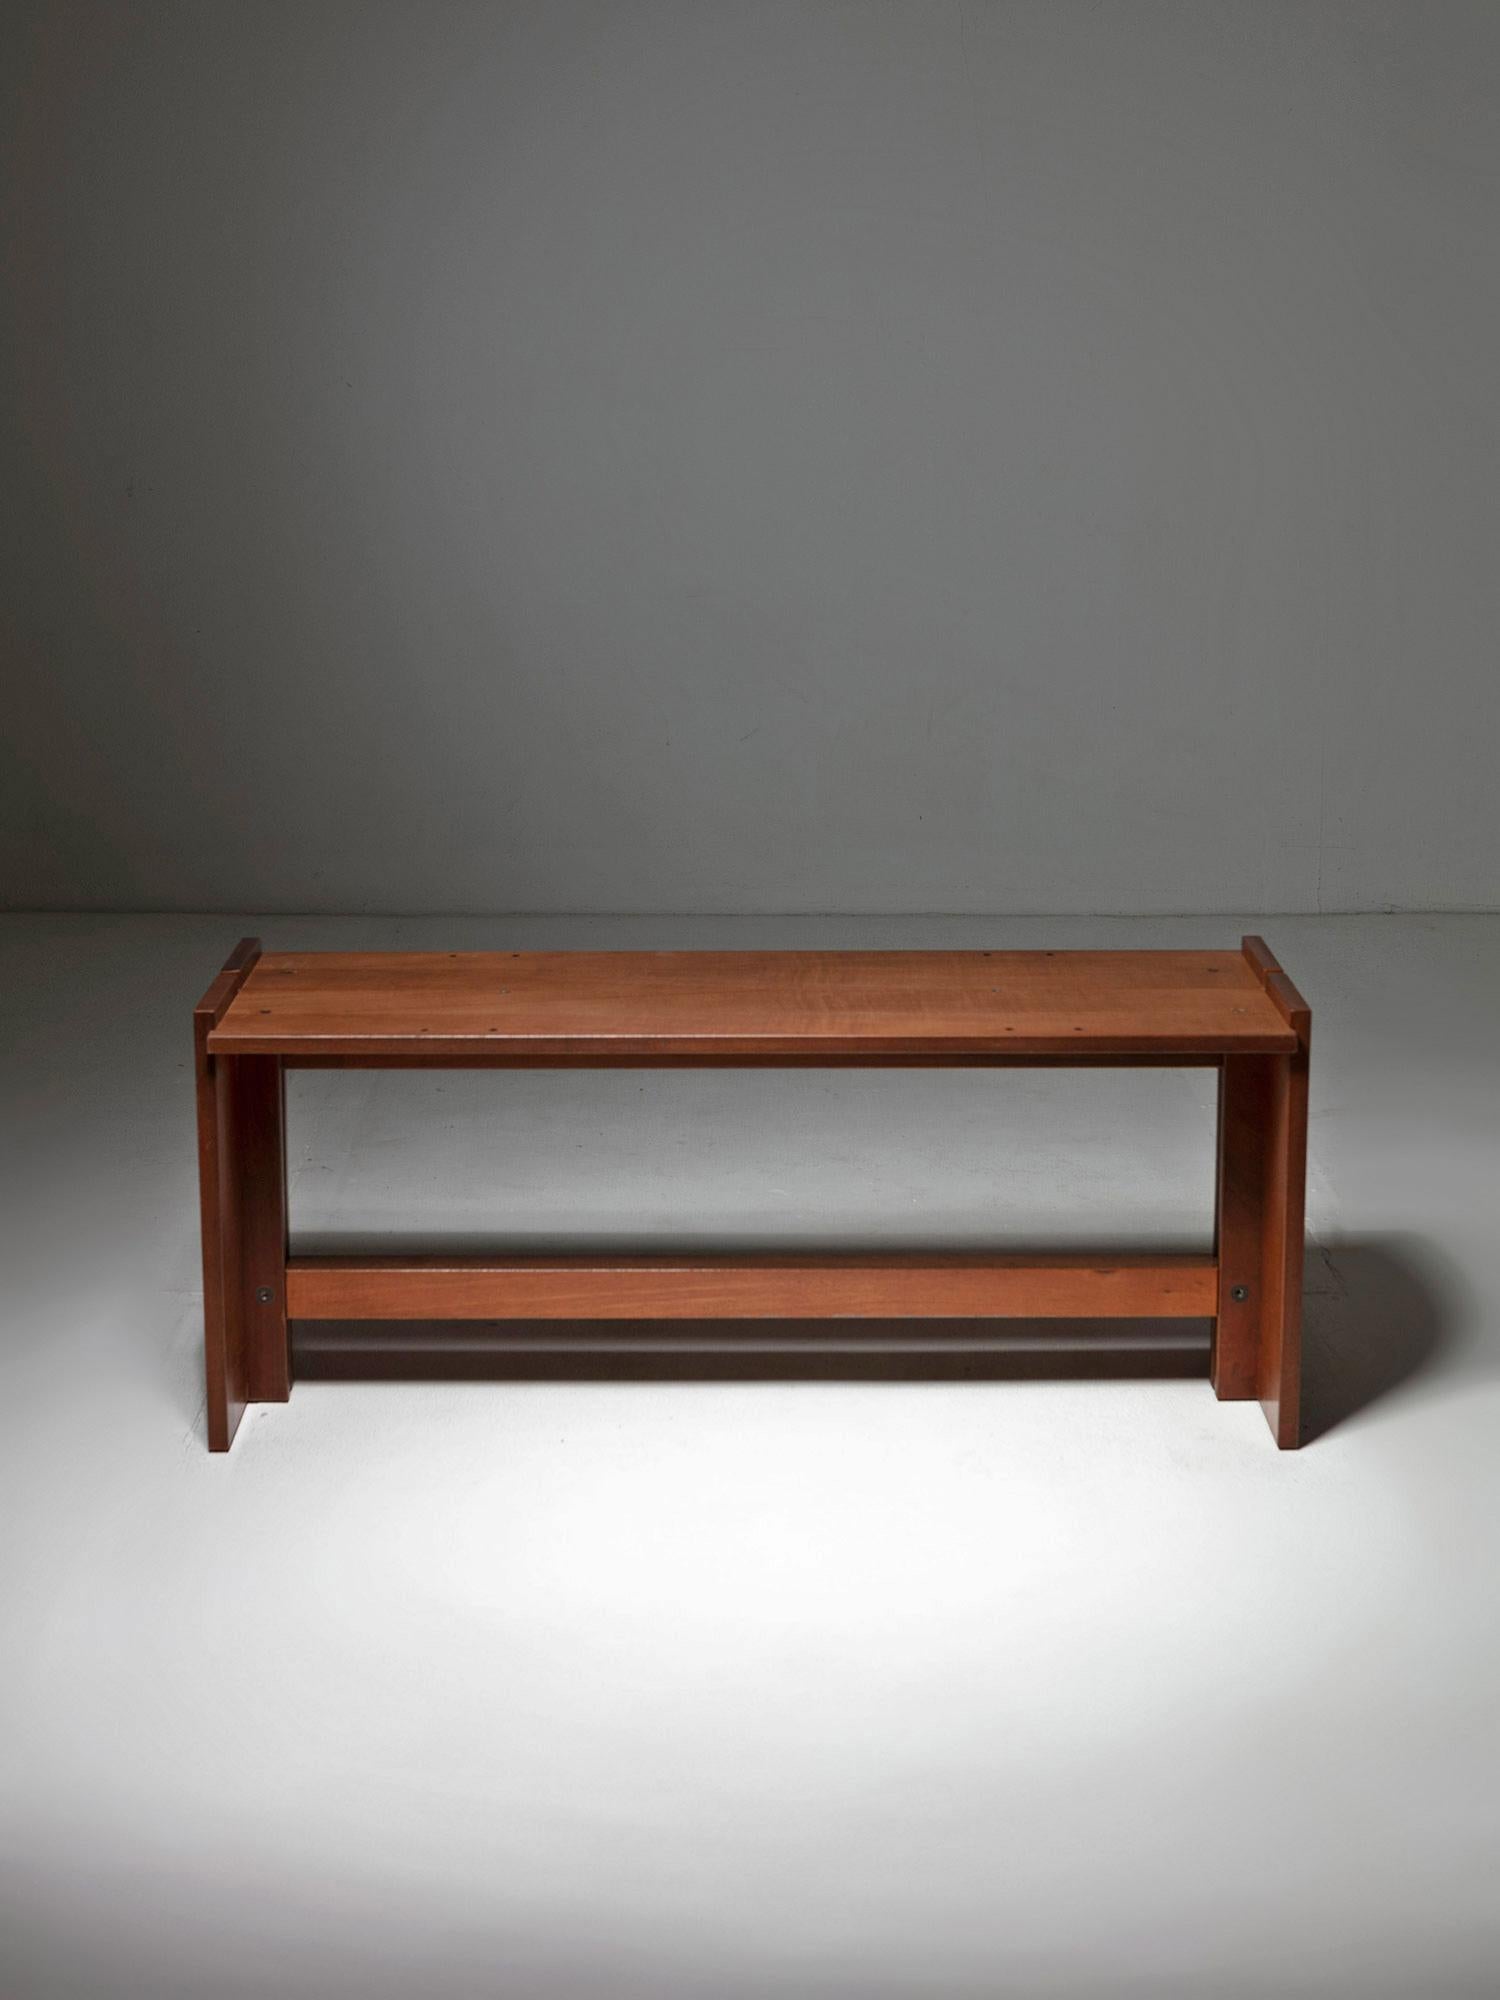 Late 20th Century Walnut and Leather Bench Model 662 by A. Vigilio for Bernini, Italy, 1980s